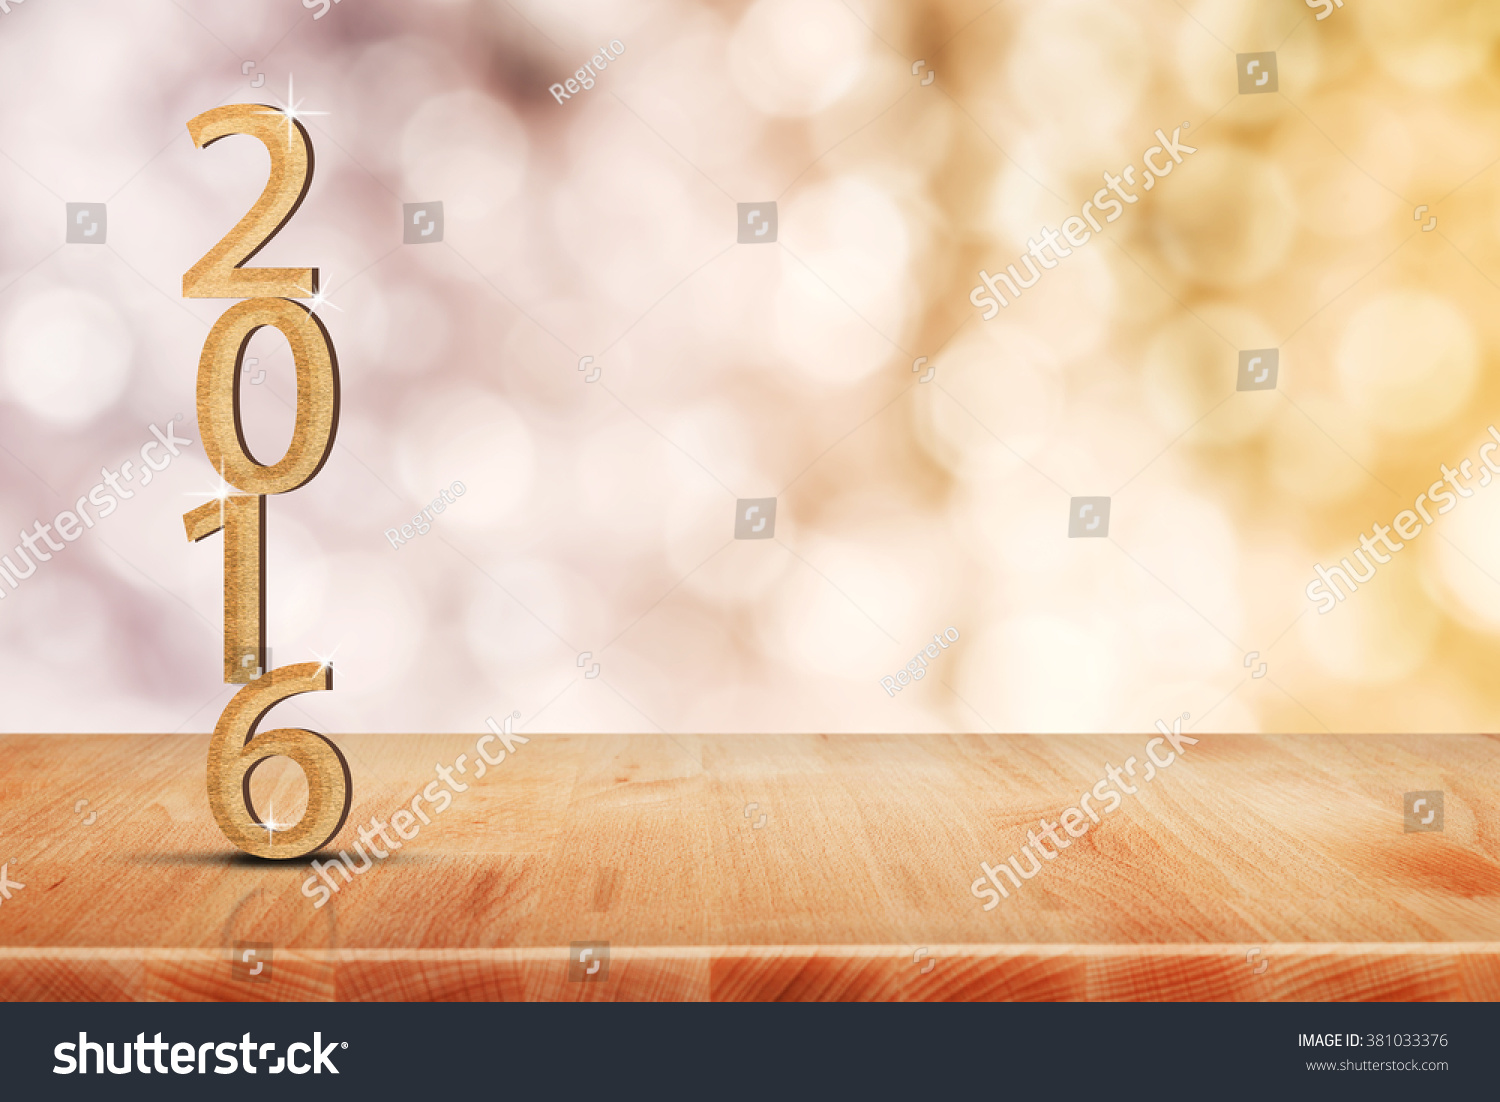 2016 year gold scratch number in perspective room with sparkling bokeh wall and wooden plank floor #381033376